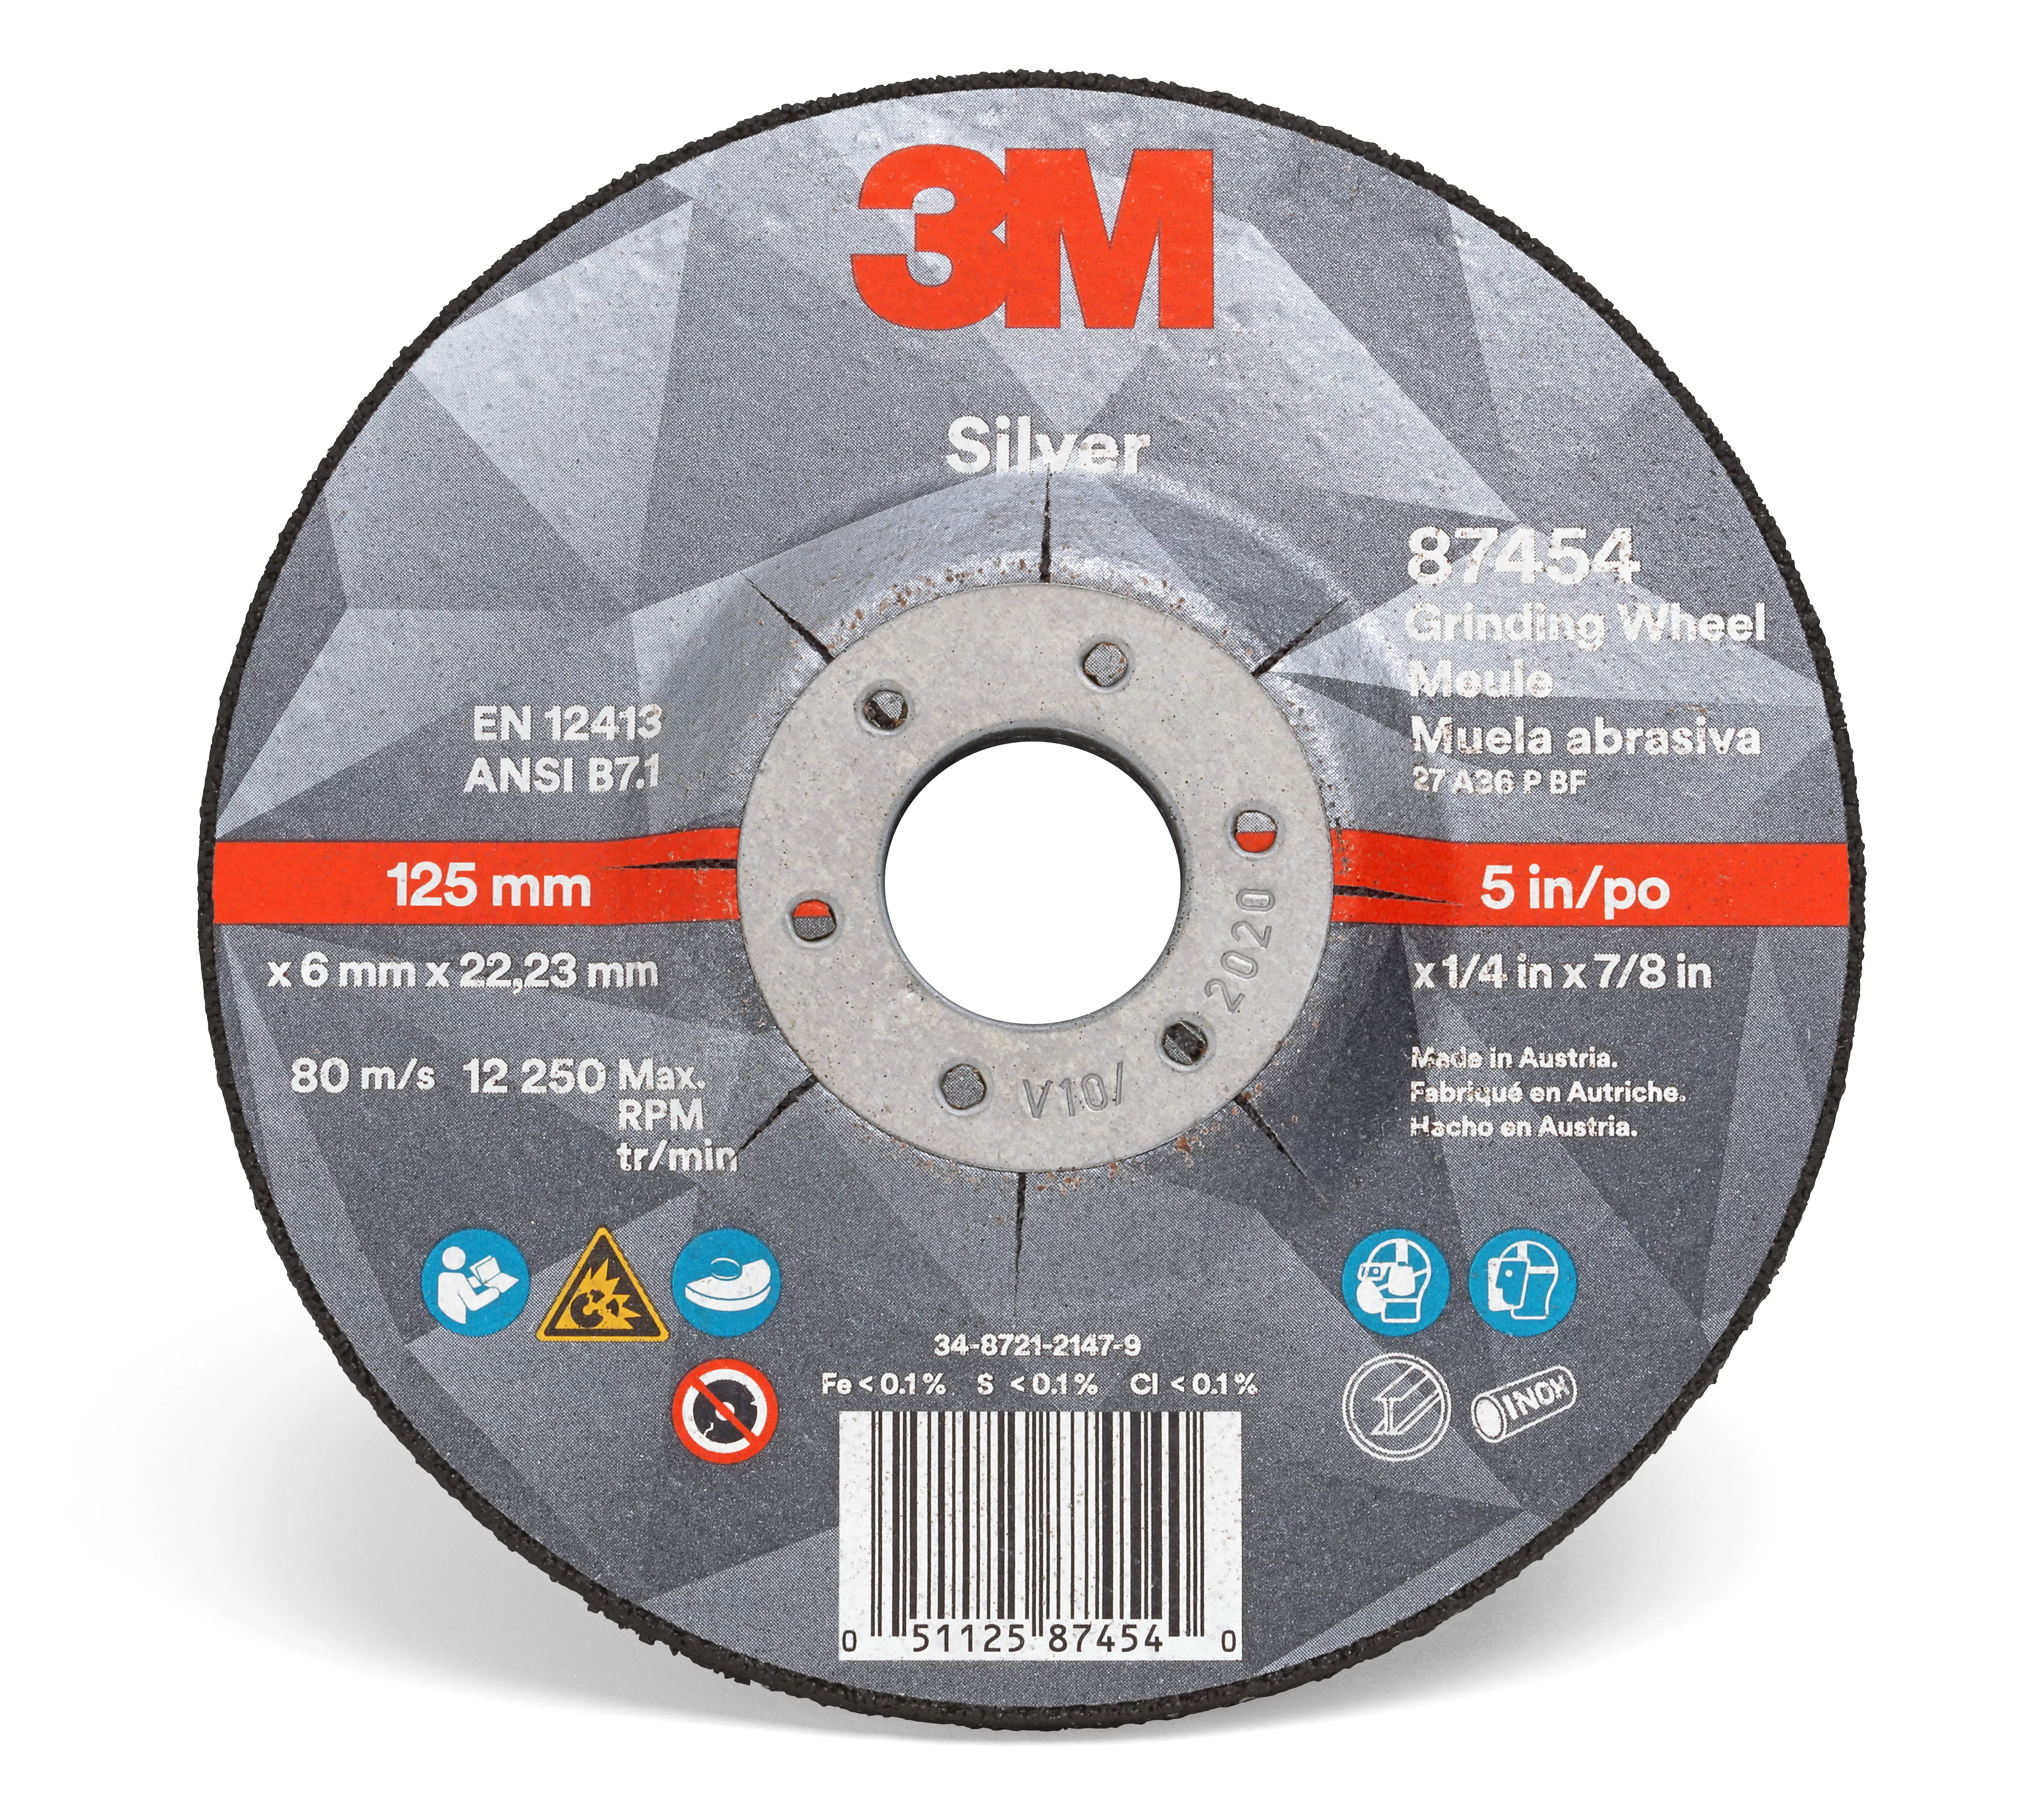 Product Number 87454 | 3M™ Silver Depressed Center Grinding Wheel